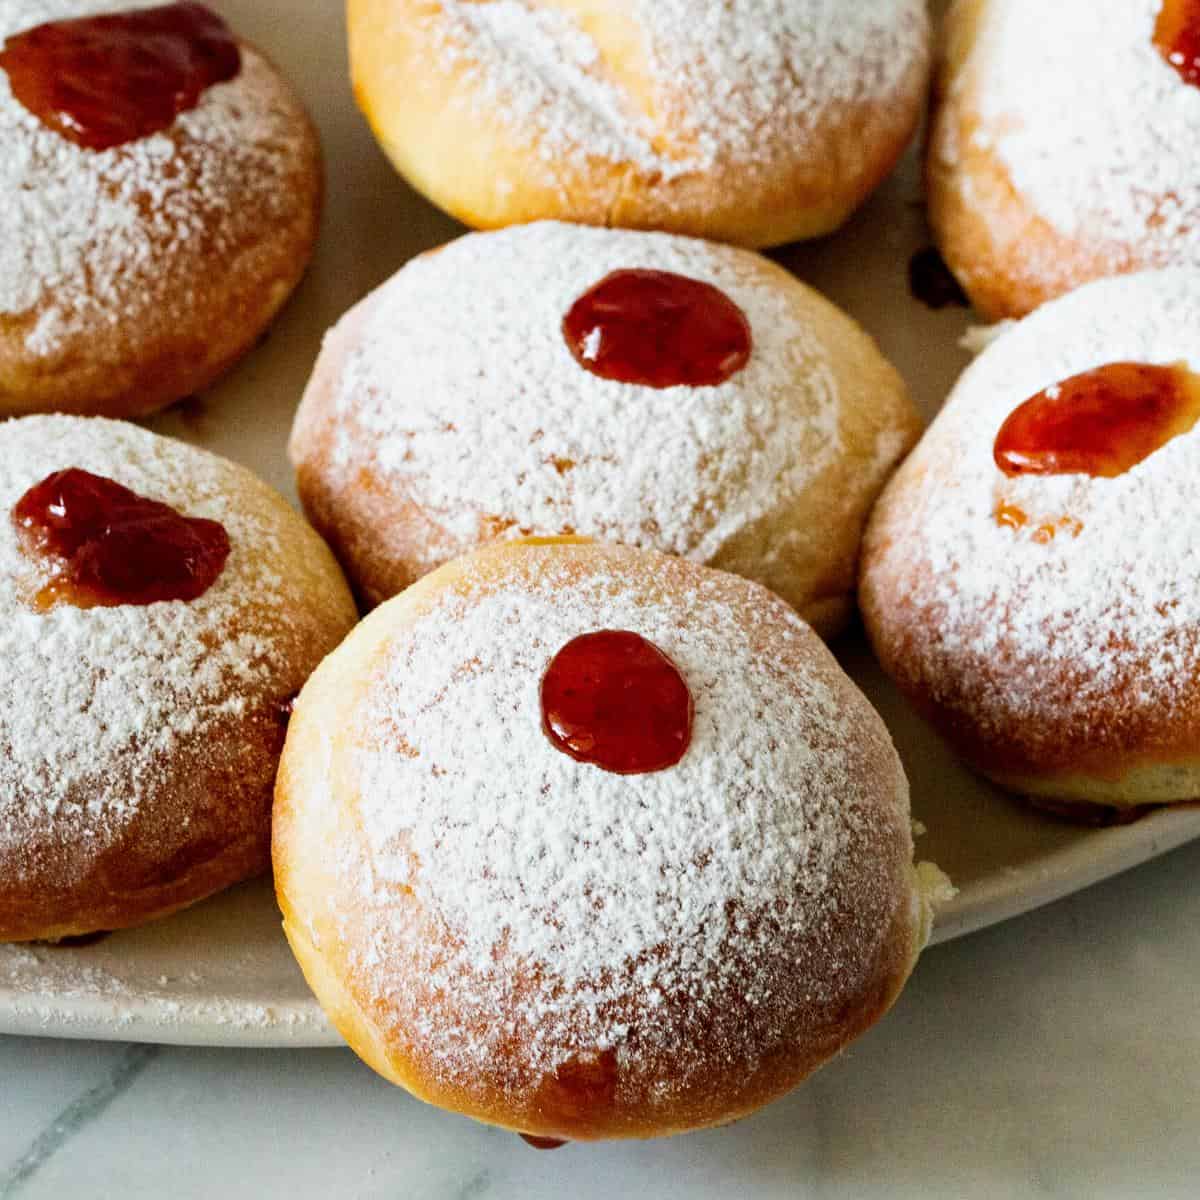 Donuts stuffed with jam on the platter.